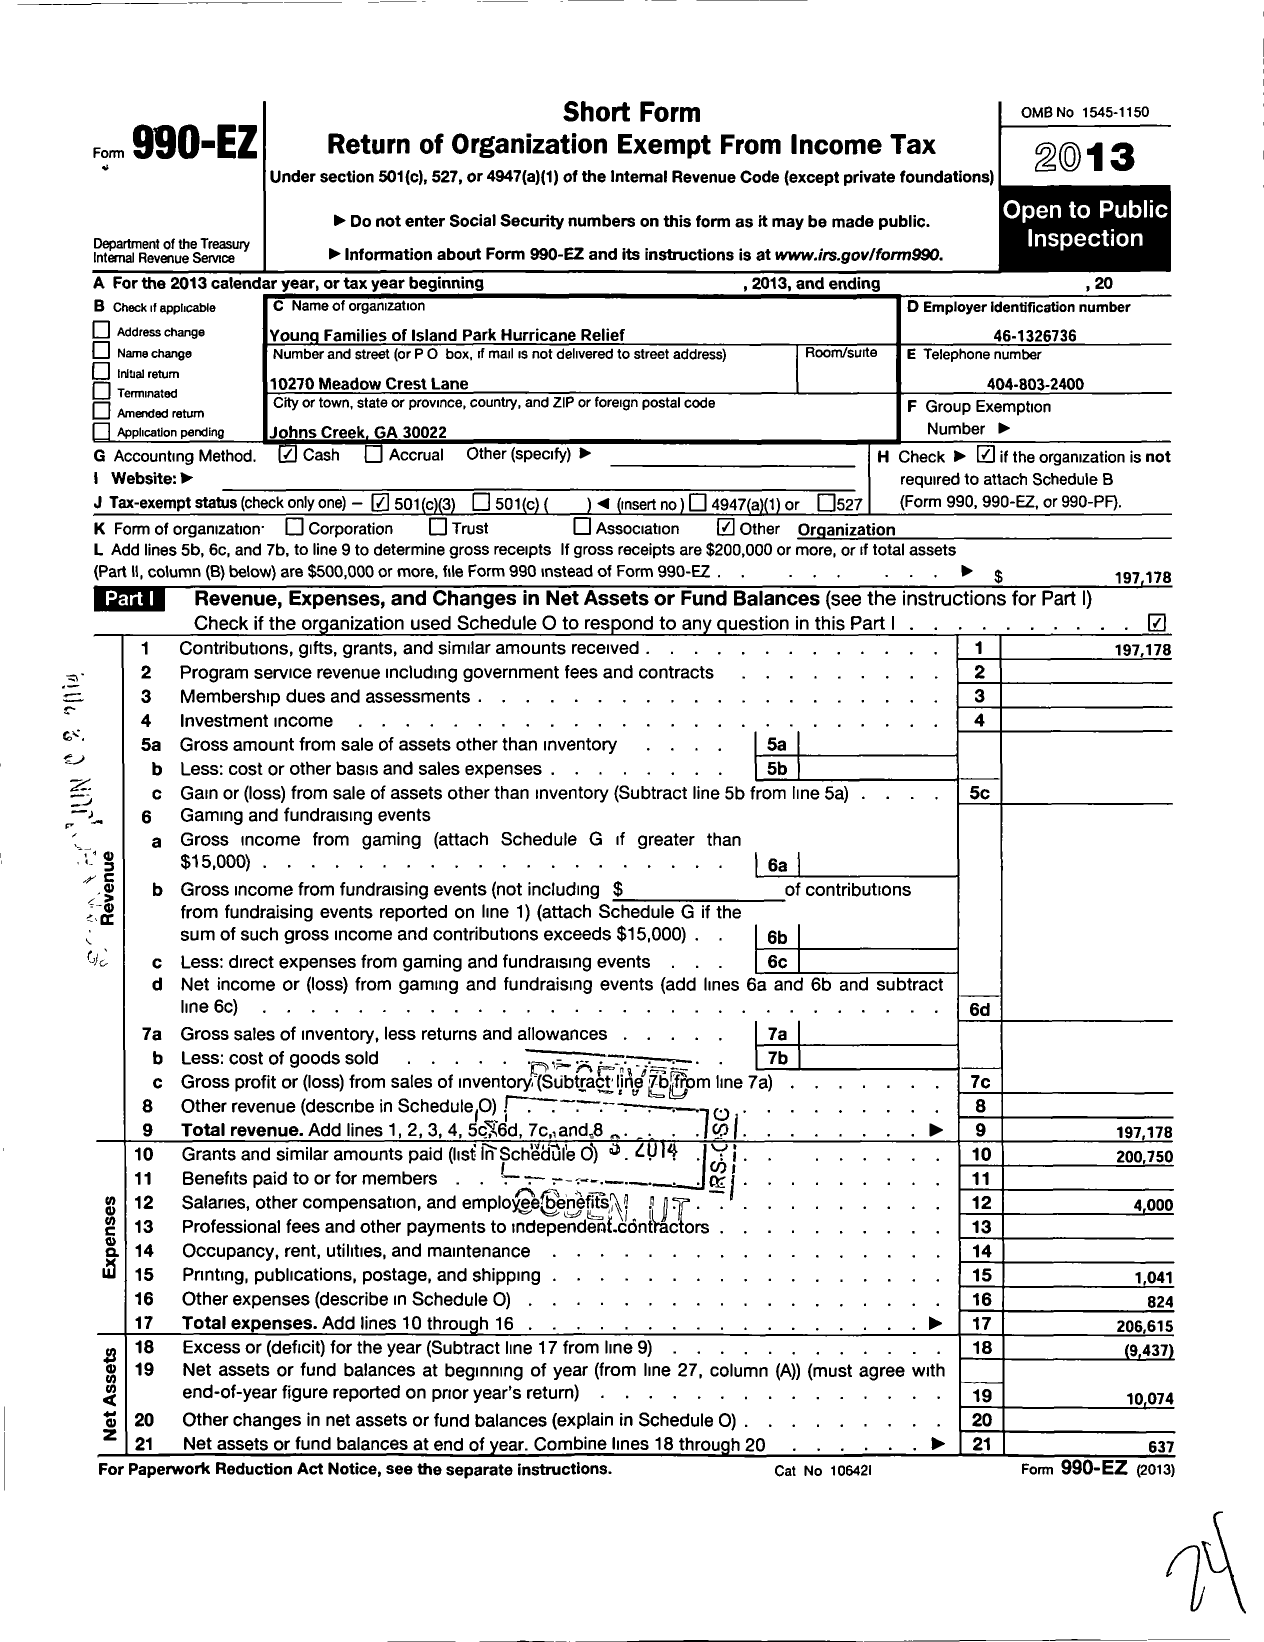 Image of first page of 2013 Form 990EZ for Young Families of Island Park Hurricane Relief